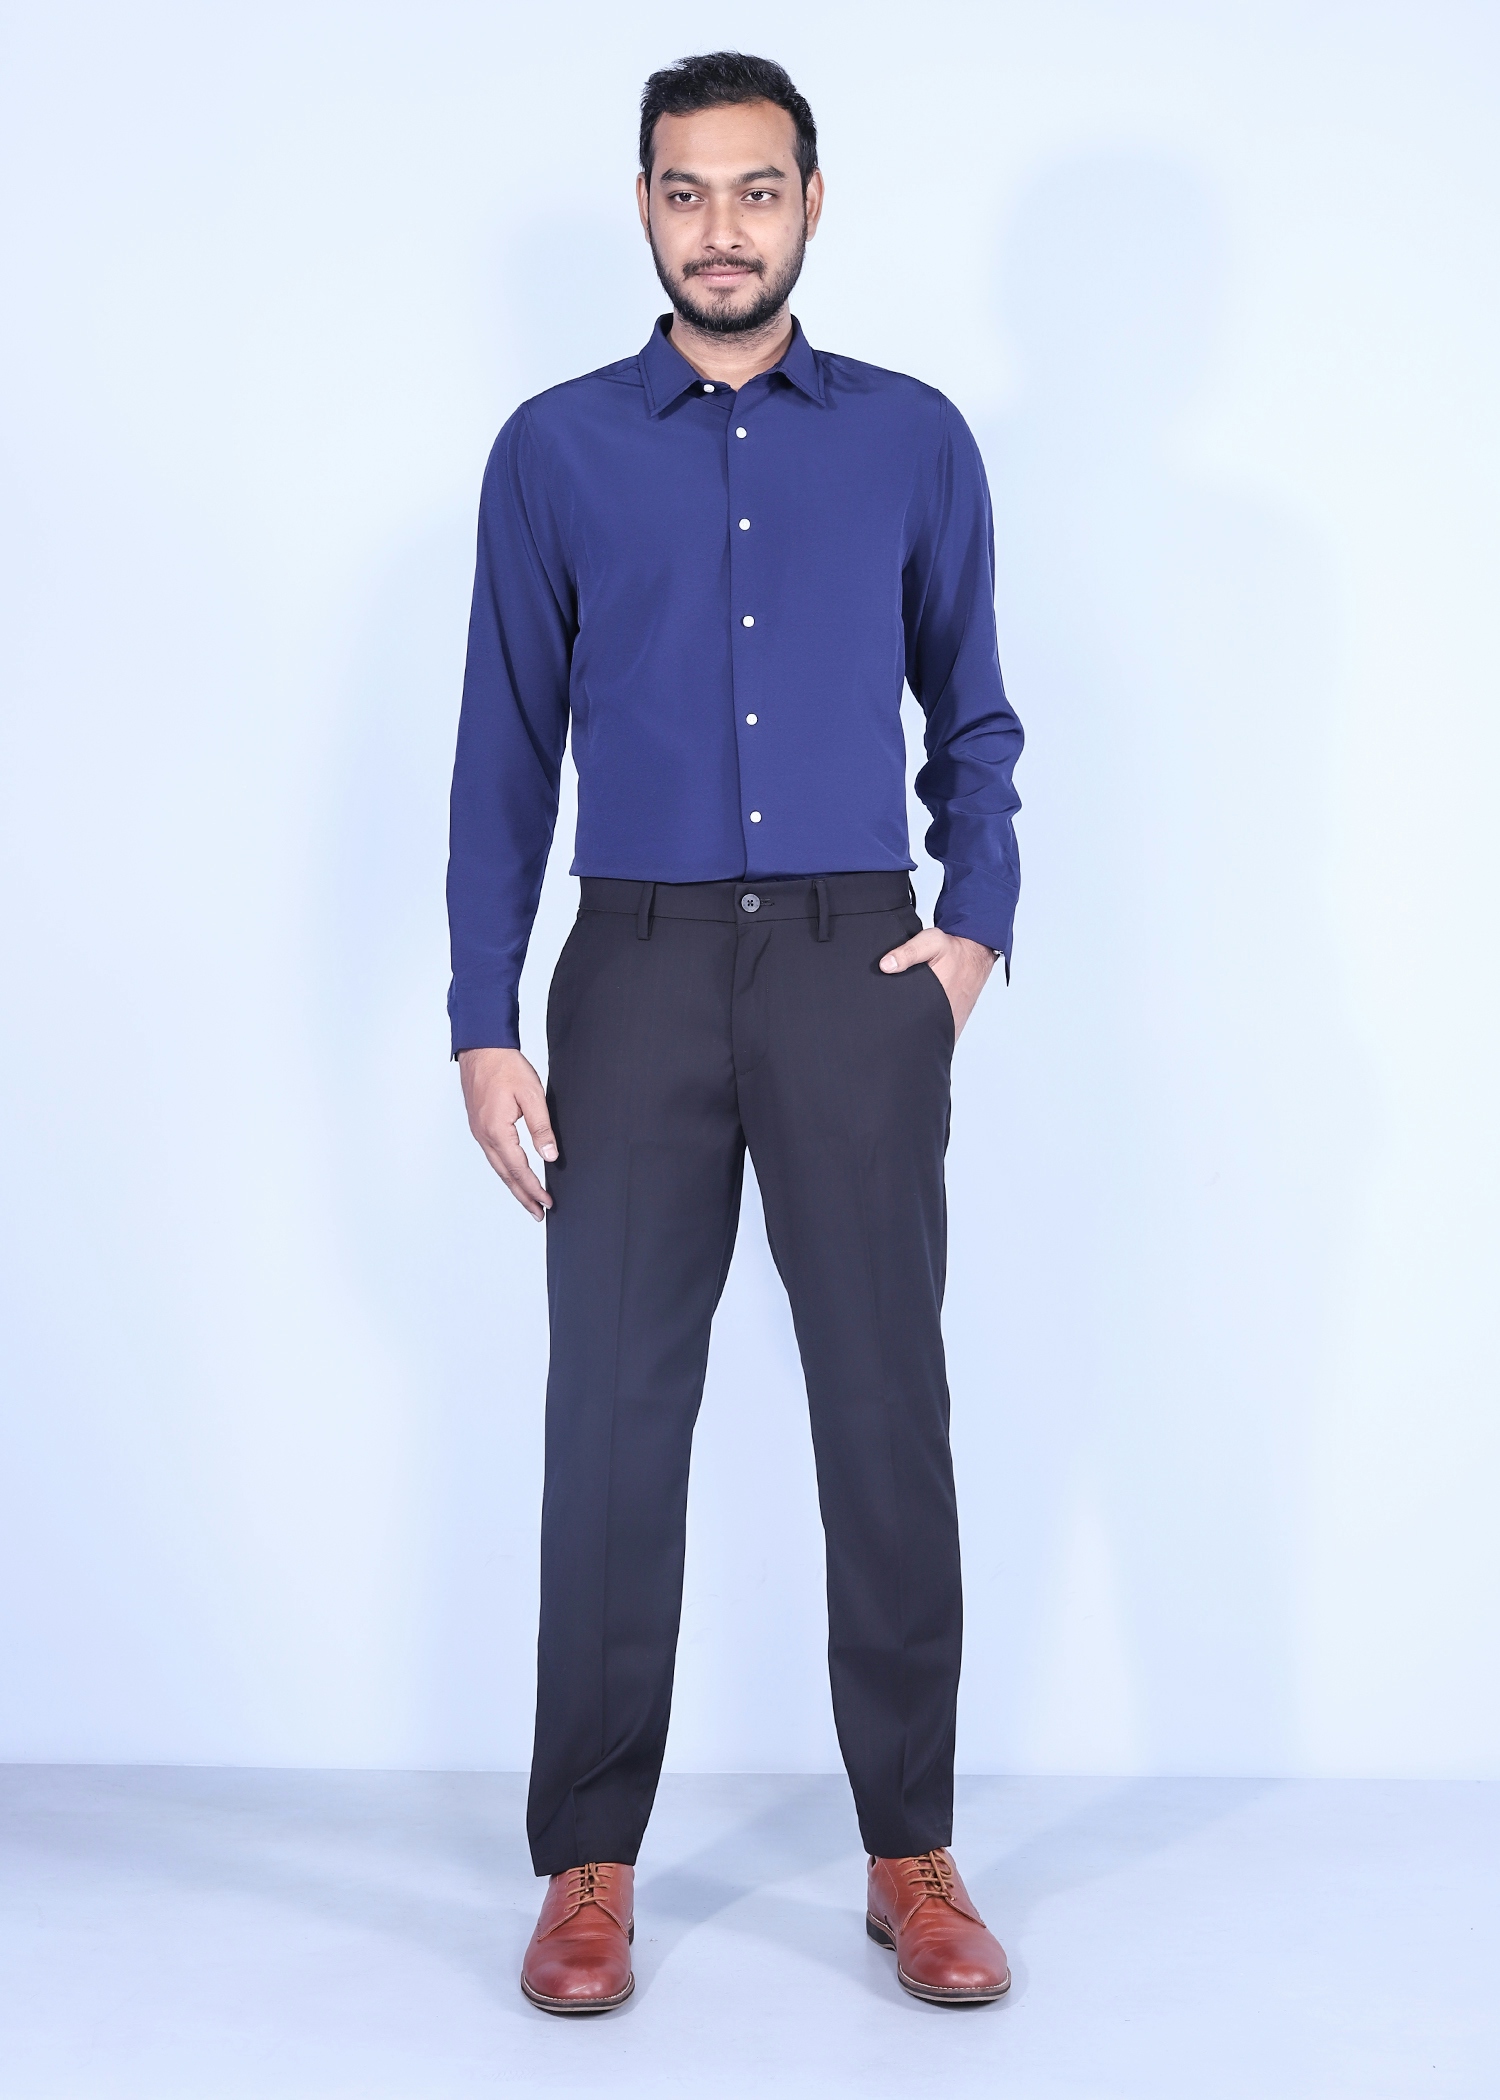 lisbon ii fromal pant black color full front view